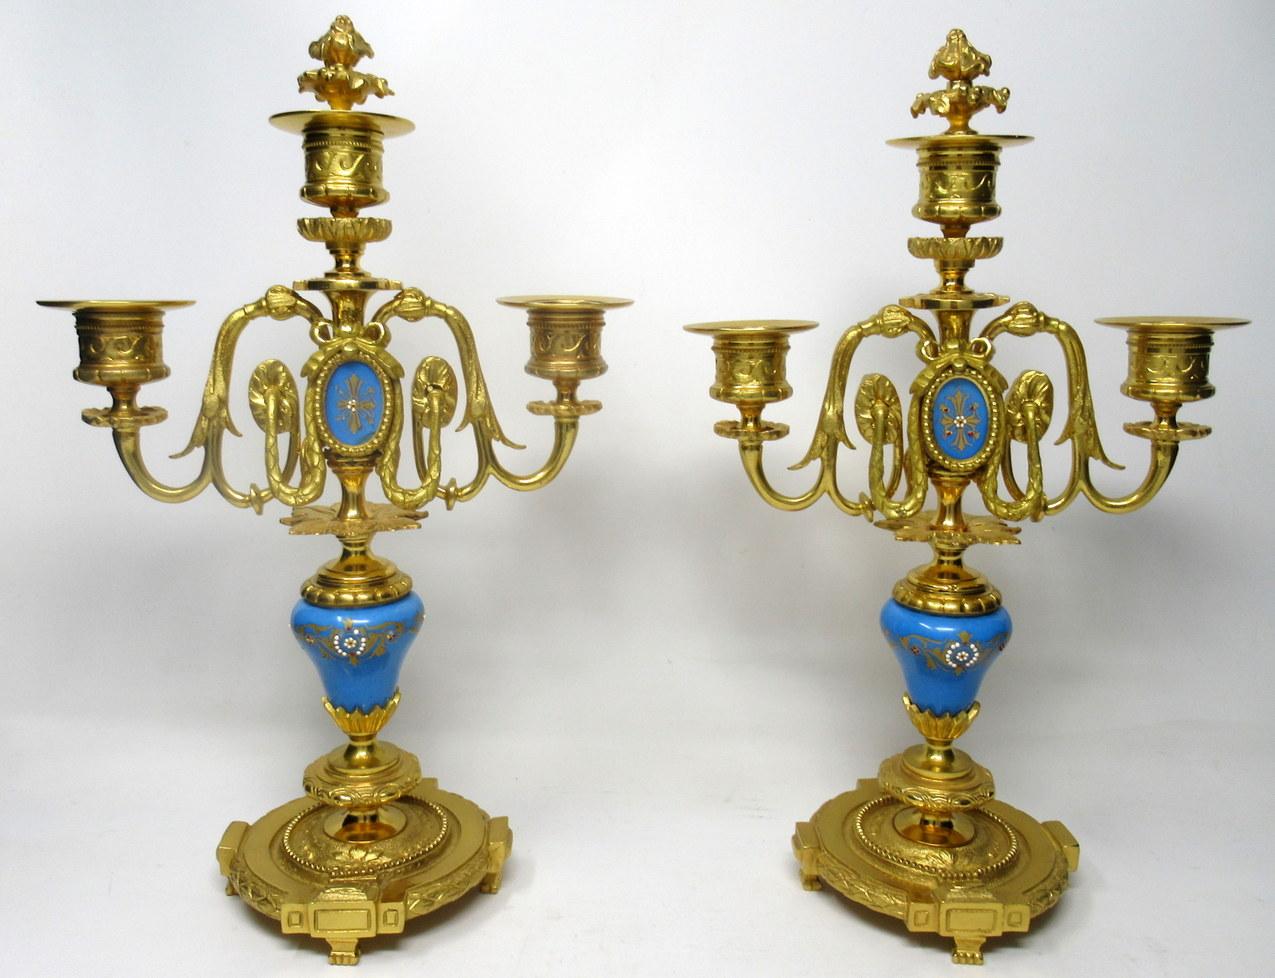 A very stylish pair of twin light gilt heavy gauge ormolu table or mantel (fireplace) candelabra in French Sevres style, last quarter of the 19th century, of French origin. 

Each with central Sevres style porcelain Urn with gilt decoration and